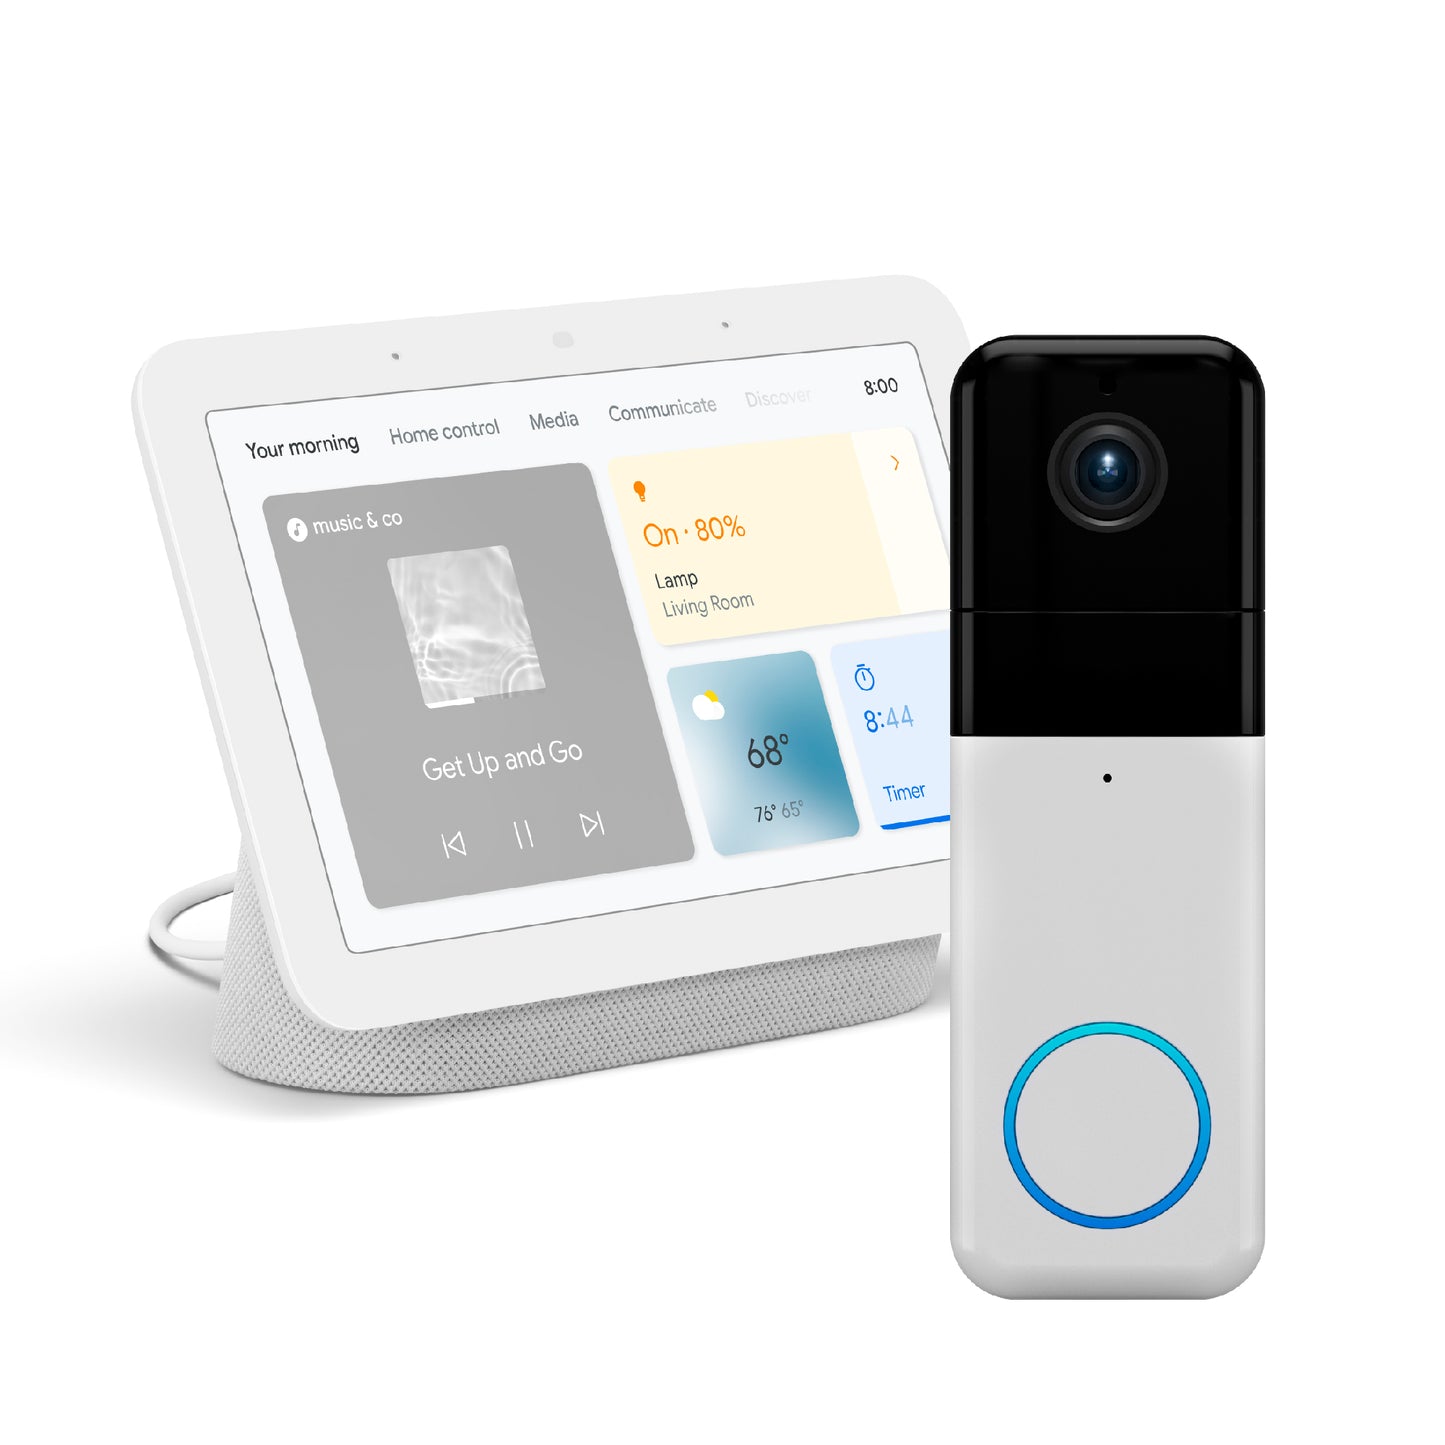 Google Nest Hub next to a Video Doorbell Proagainst a white background.